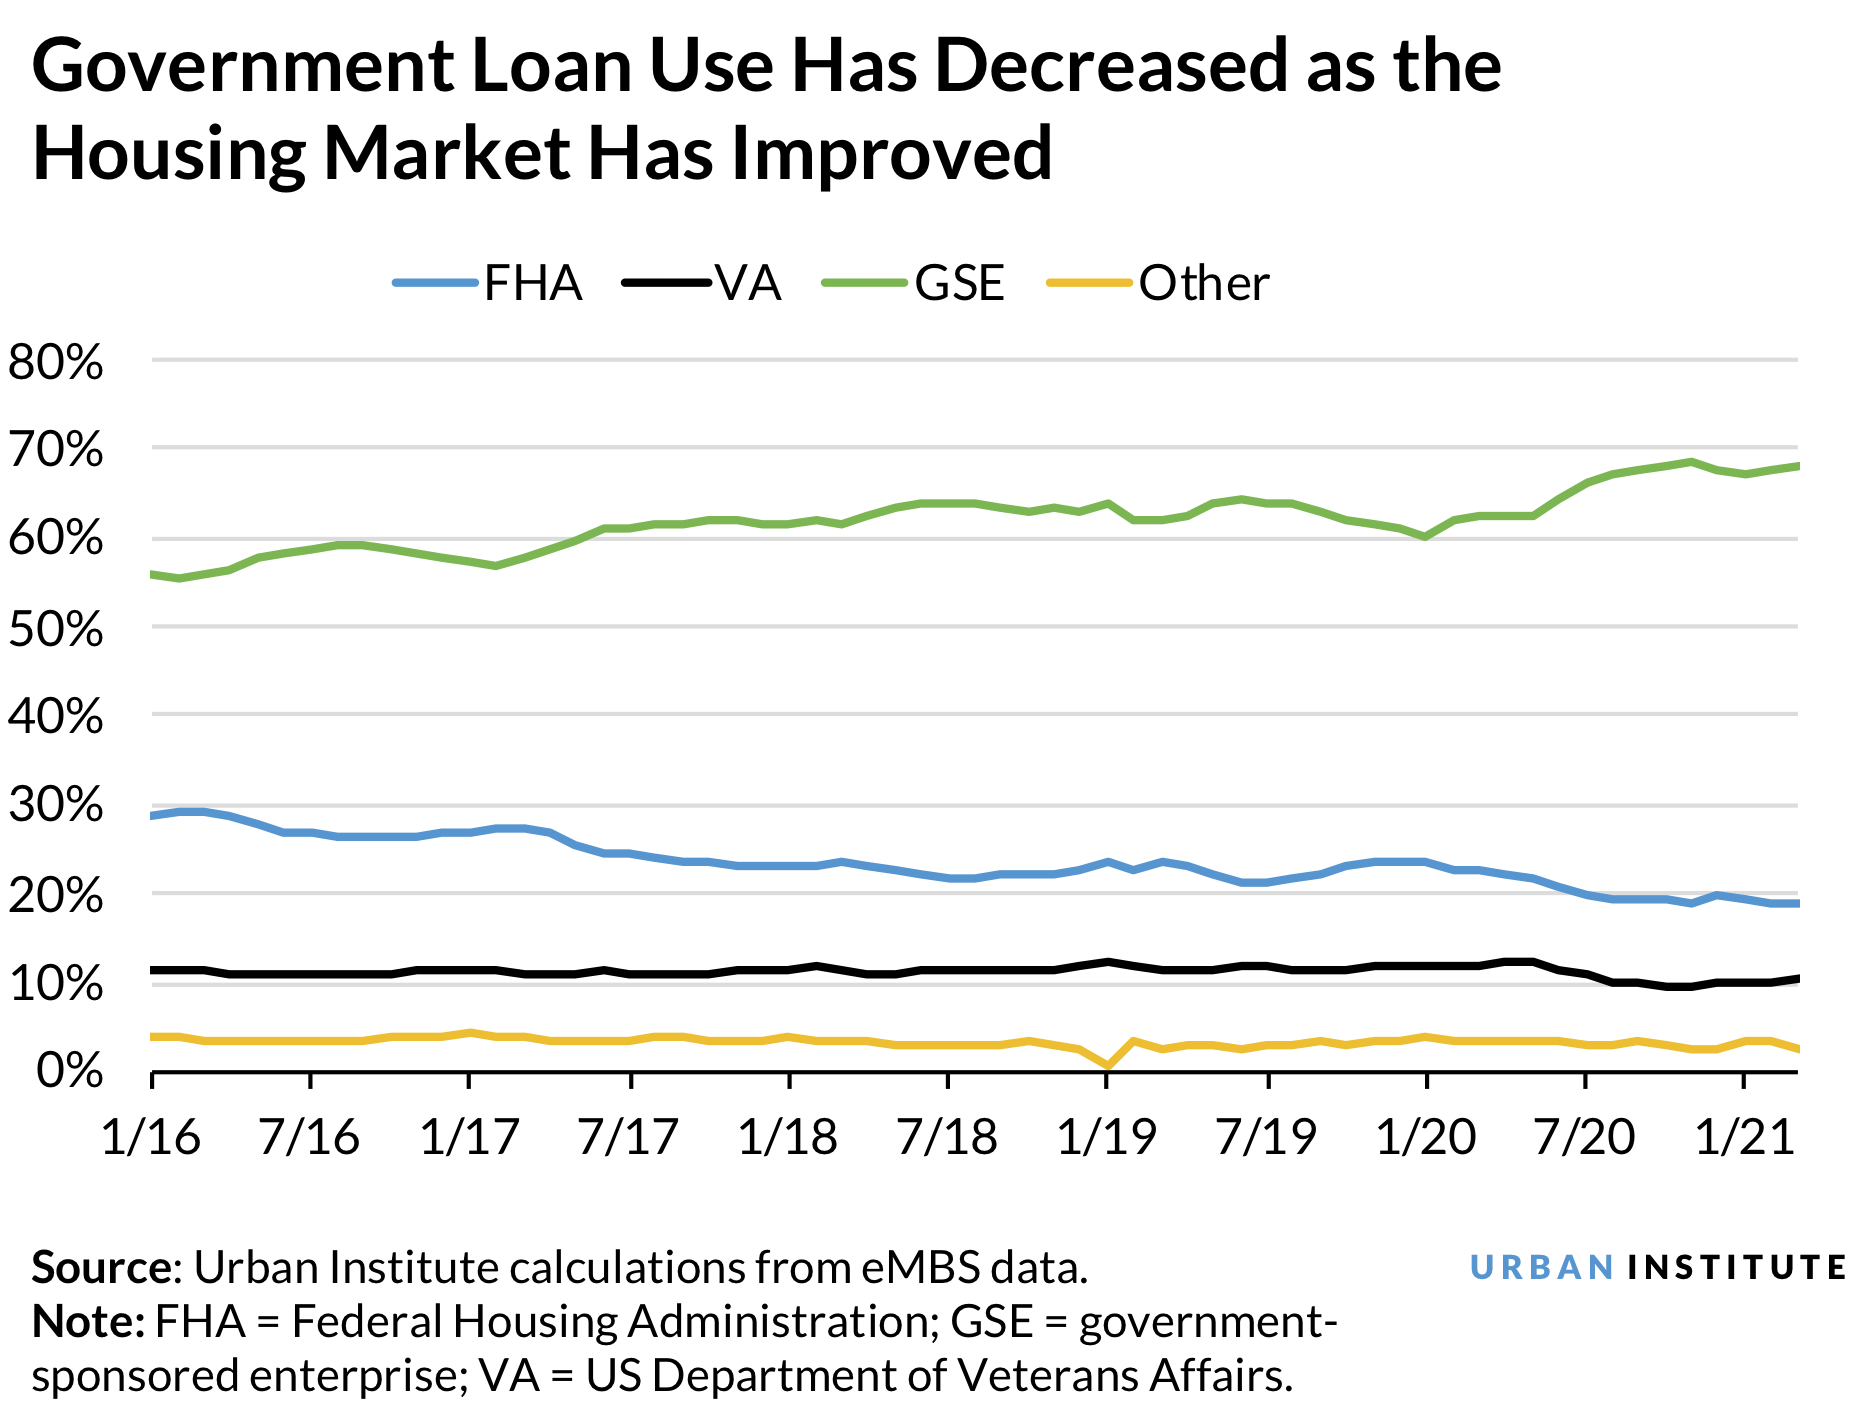 Line chart showing government loan use has decreased as the housing market has improved